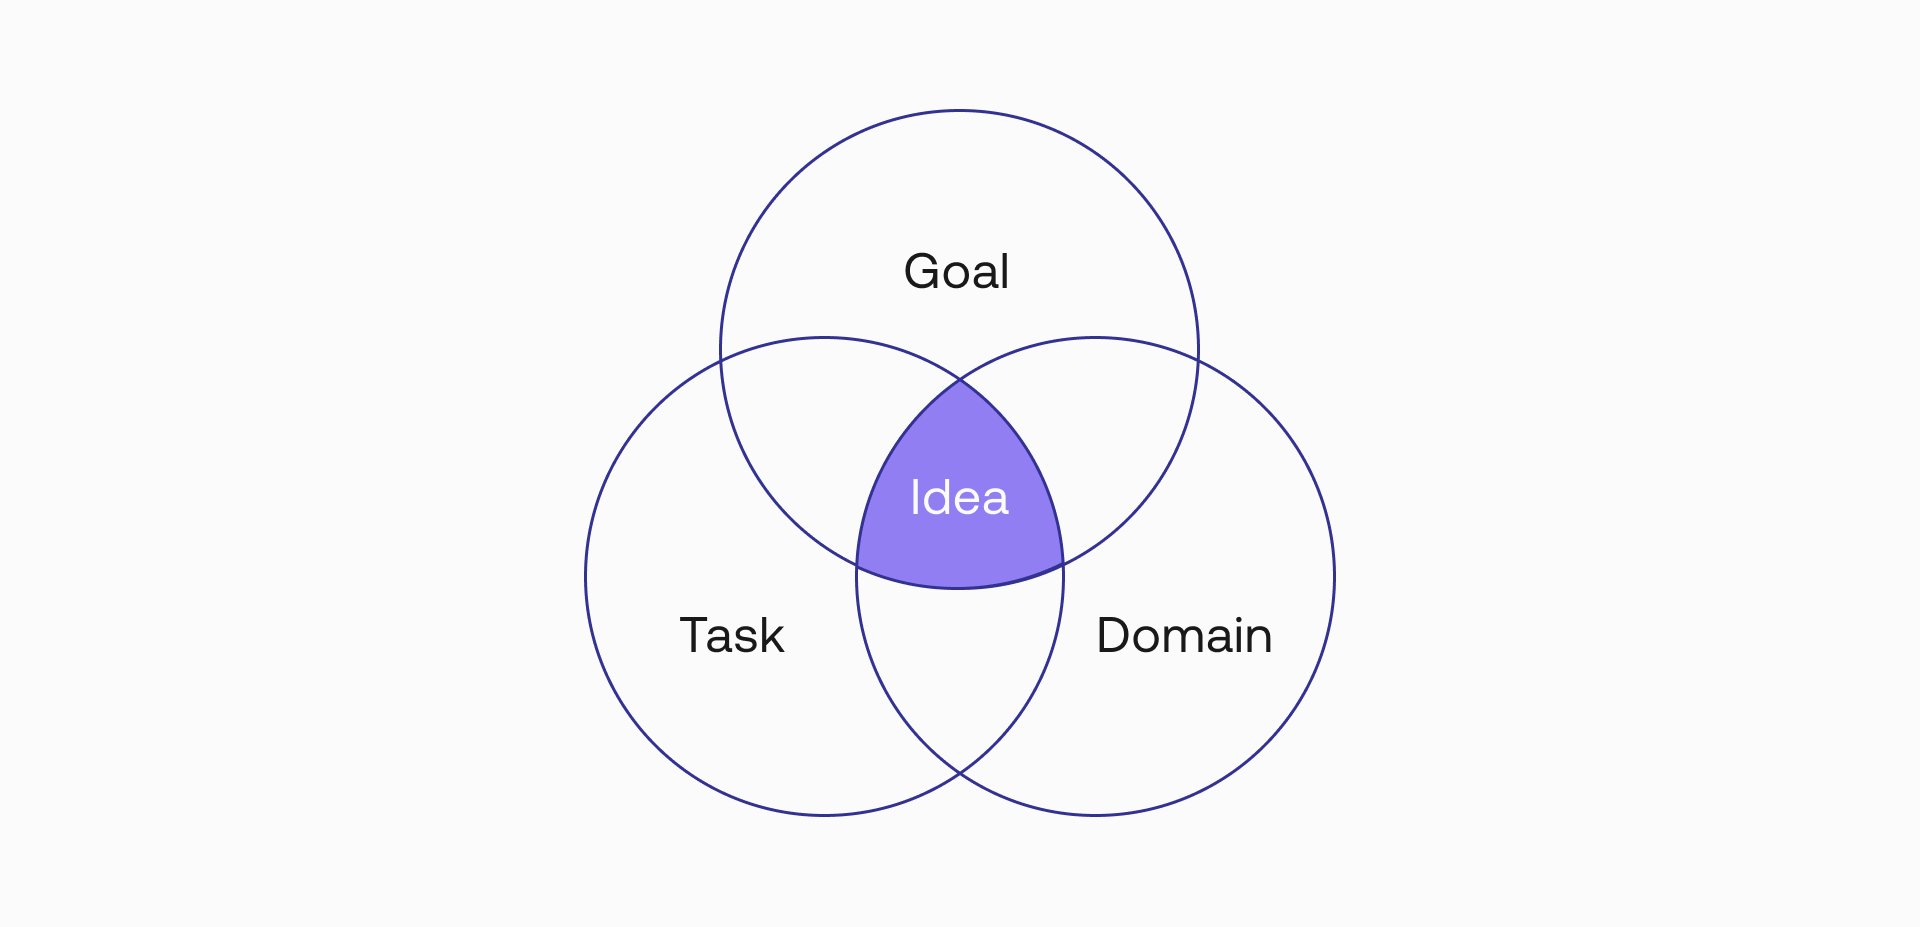 Your idea is probably sitting at the intersection of these three areas.